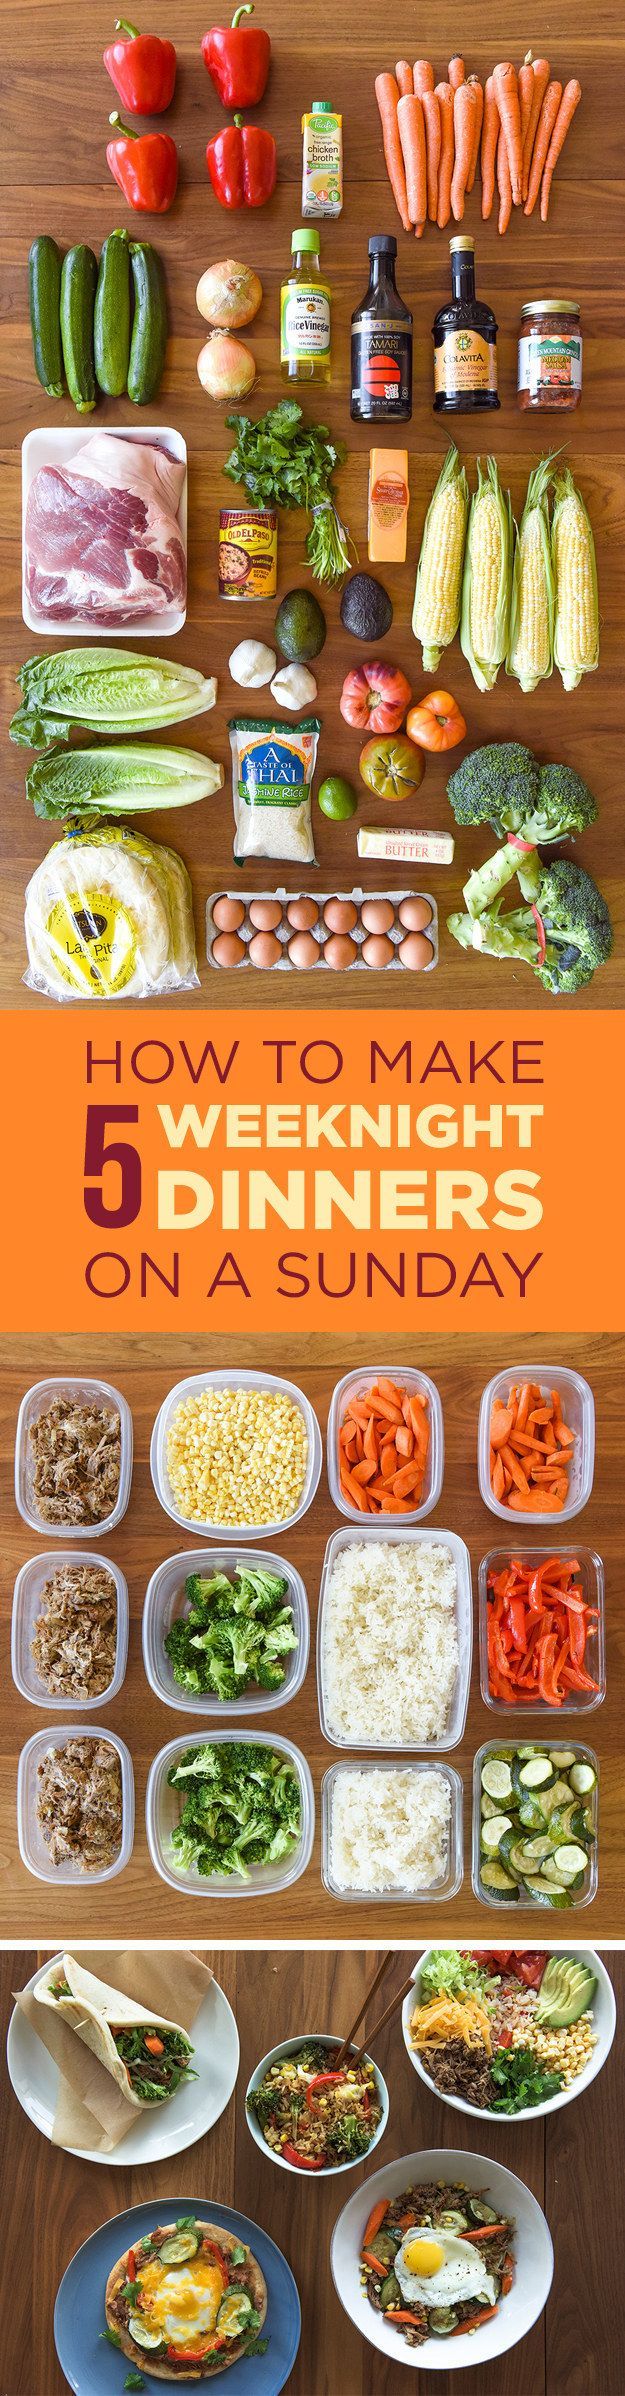 This four-person meal plan comes with a grocery list, step-by-step instructions, and zero weeknight hassle